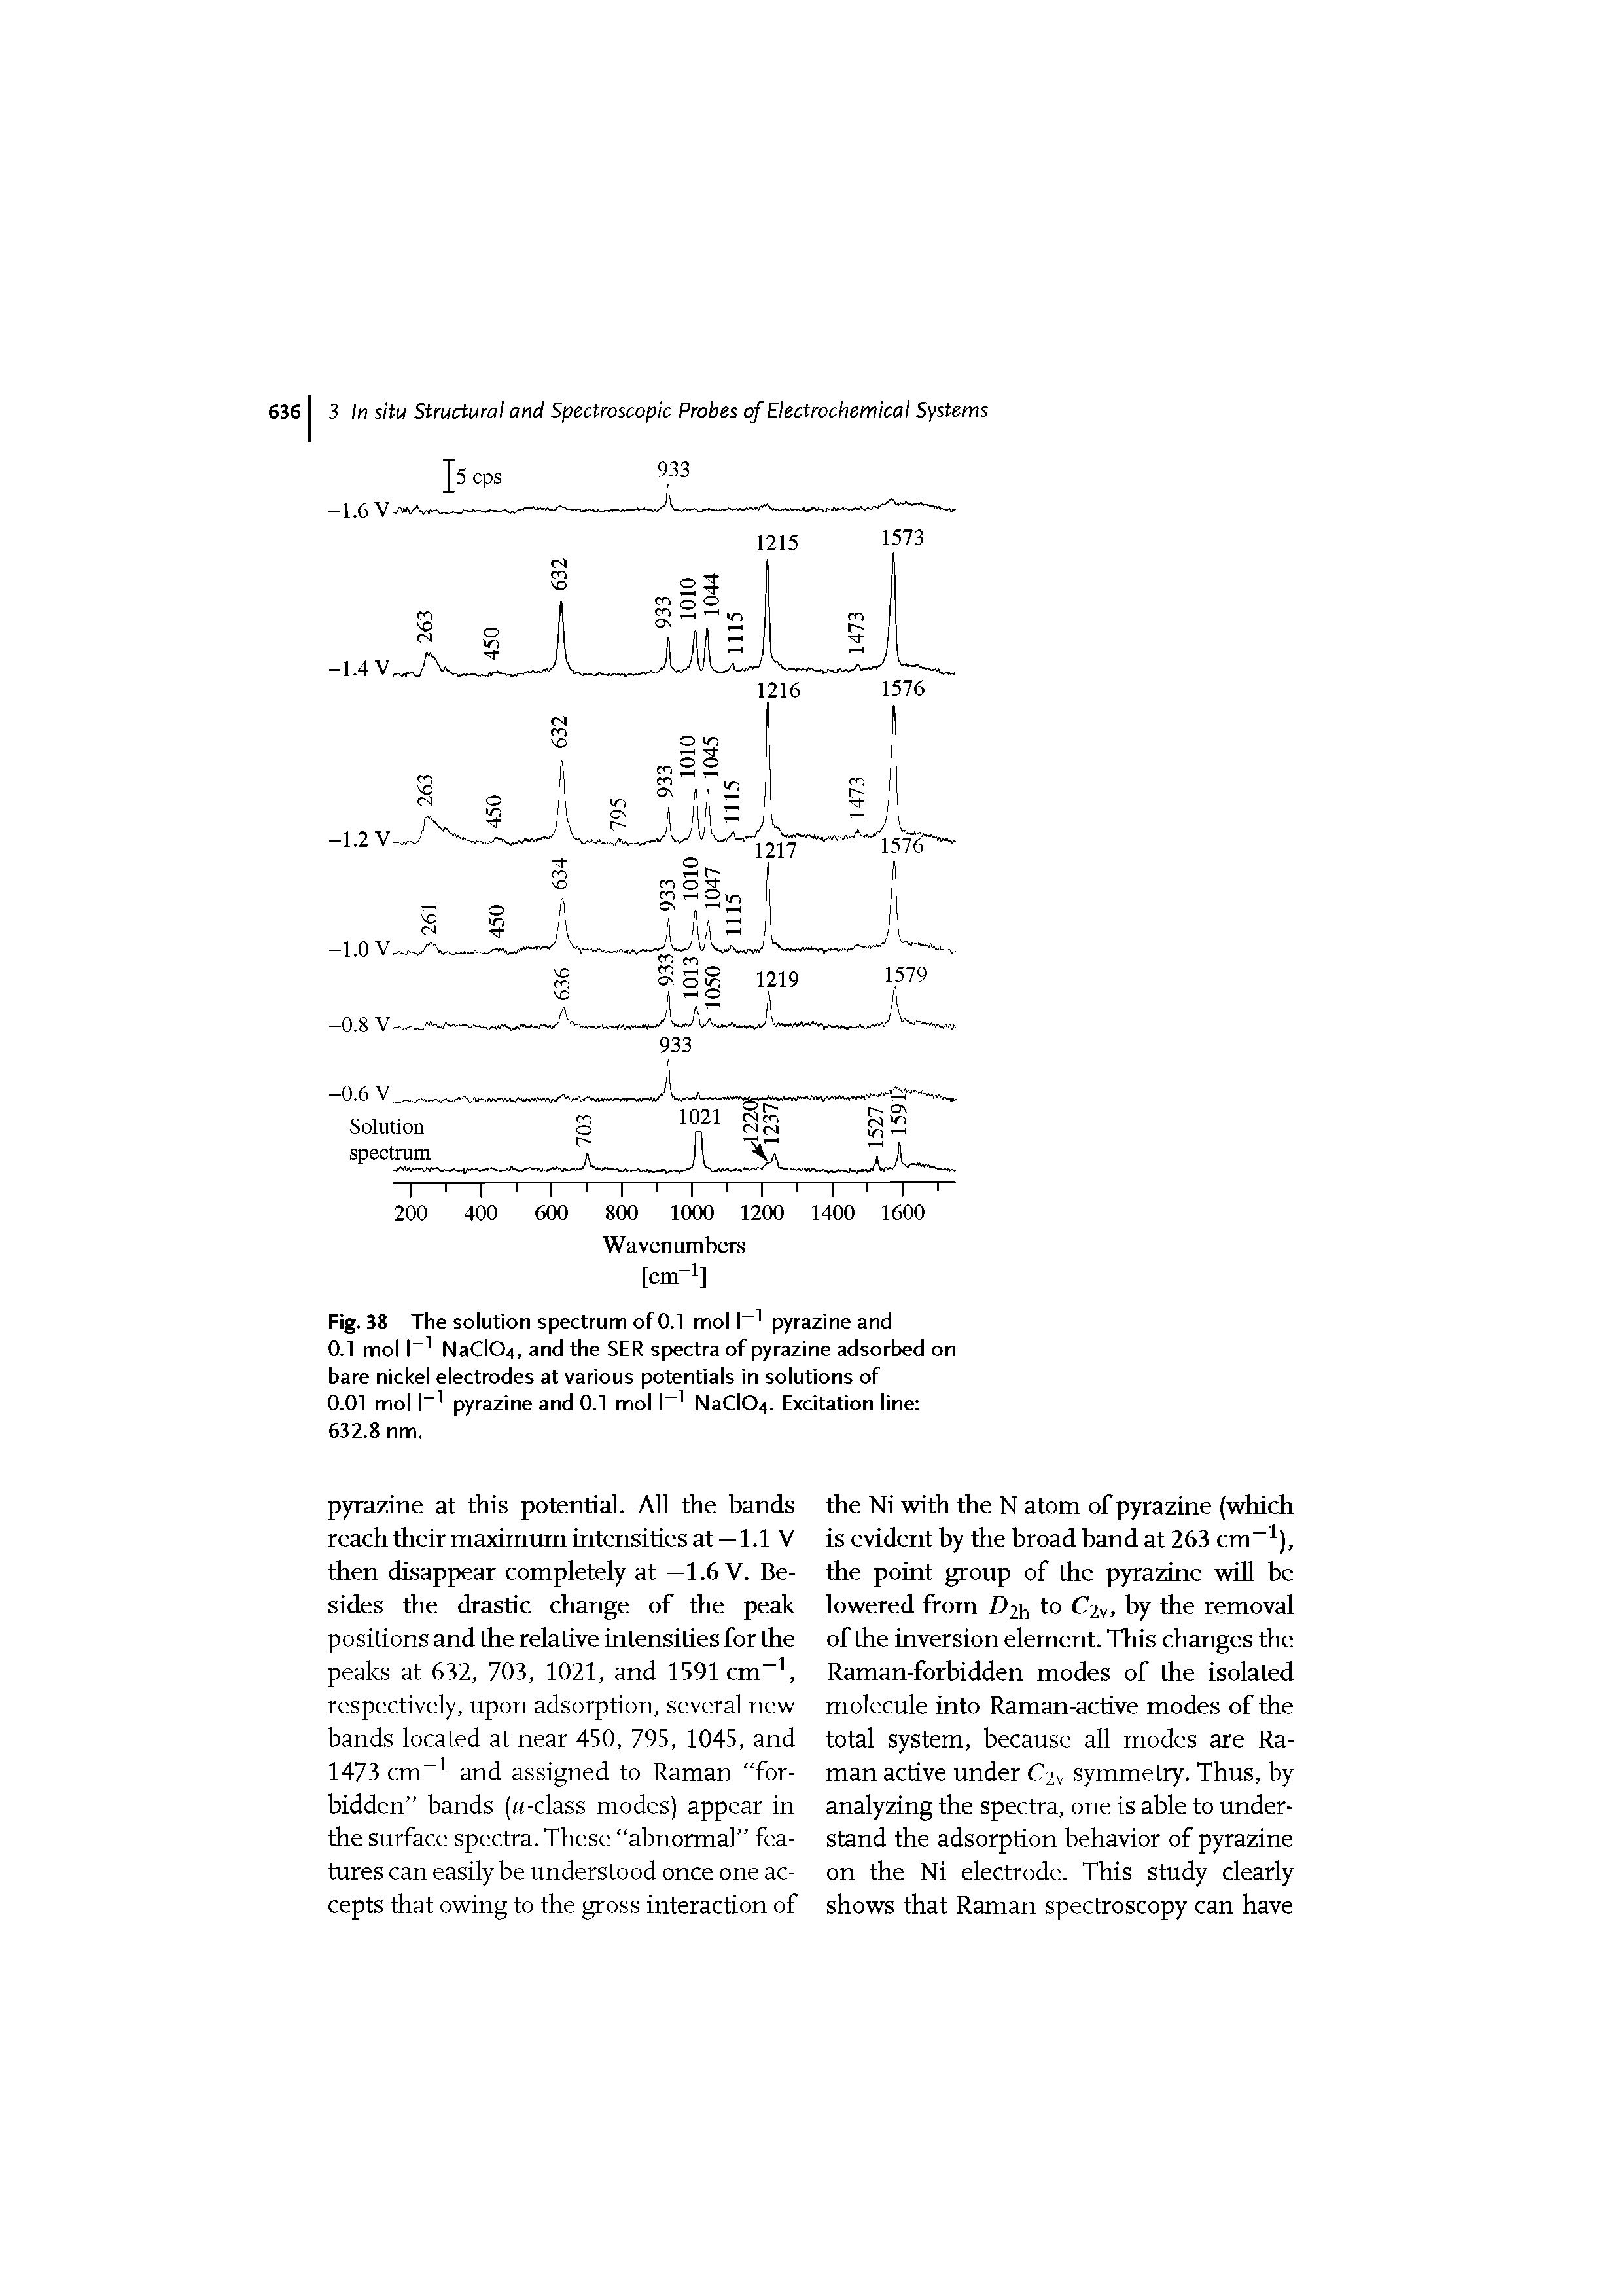 Fig. 38 The solution spectrum of 0.1 mol 1 pyrazine and 0.1 mol 1 NaCl04, and the SER spectra of pyrazine adsorbed on bare nickel electrodes at various potentials in solutions of 0.01 mol 1 pyrazine and 0.1 mol 1 NaCl04. Excitation line 632.8 nm.